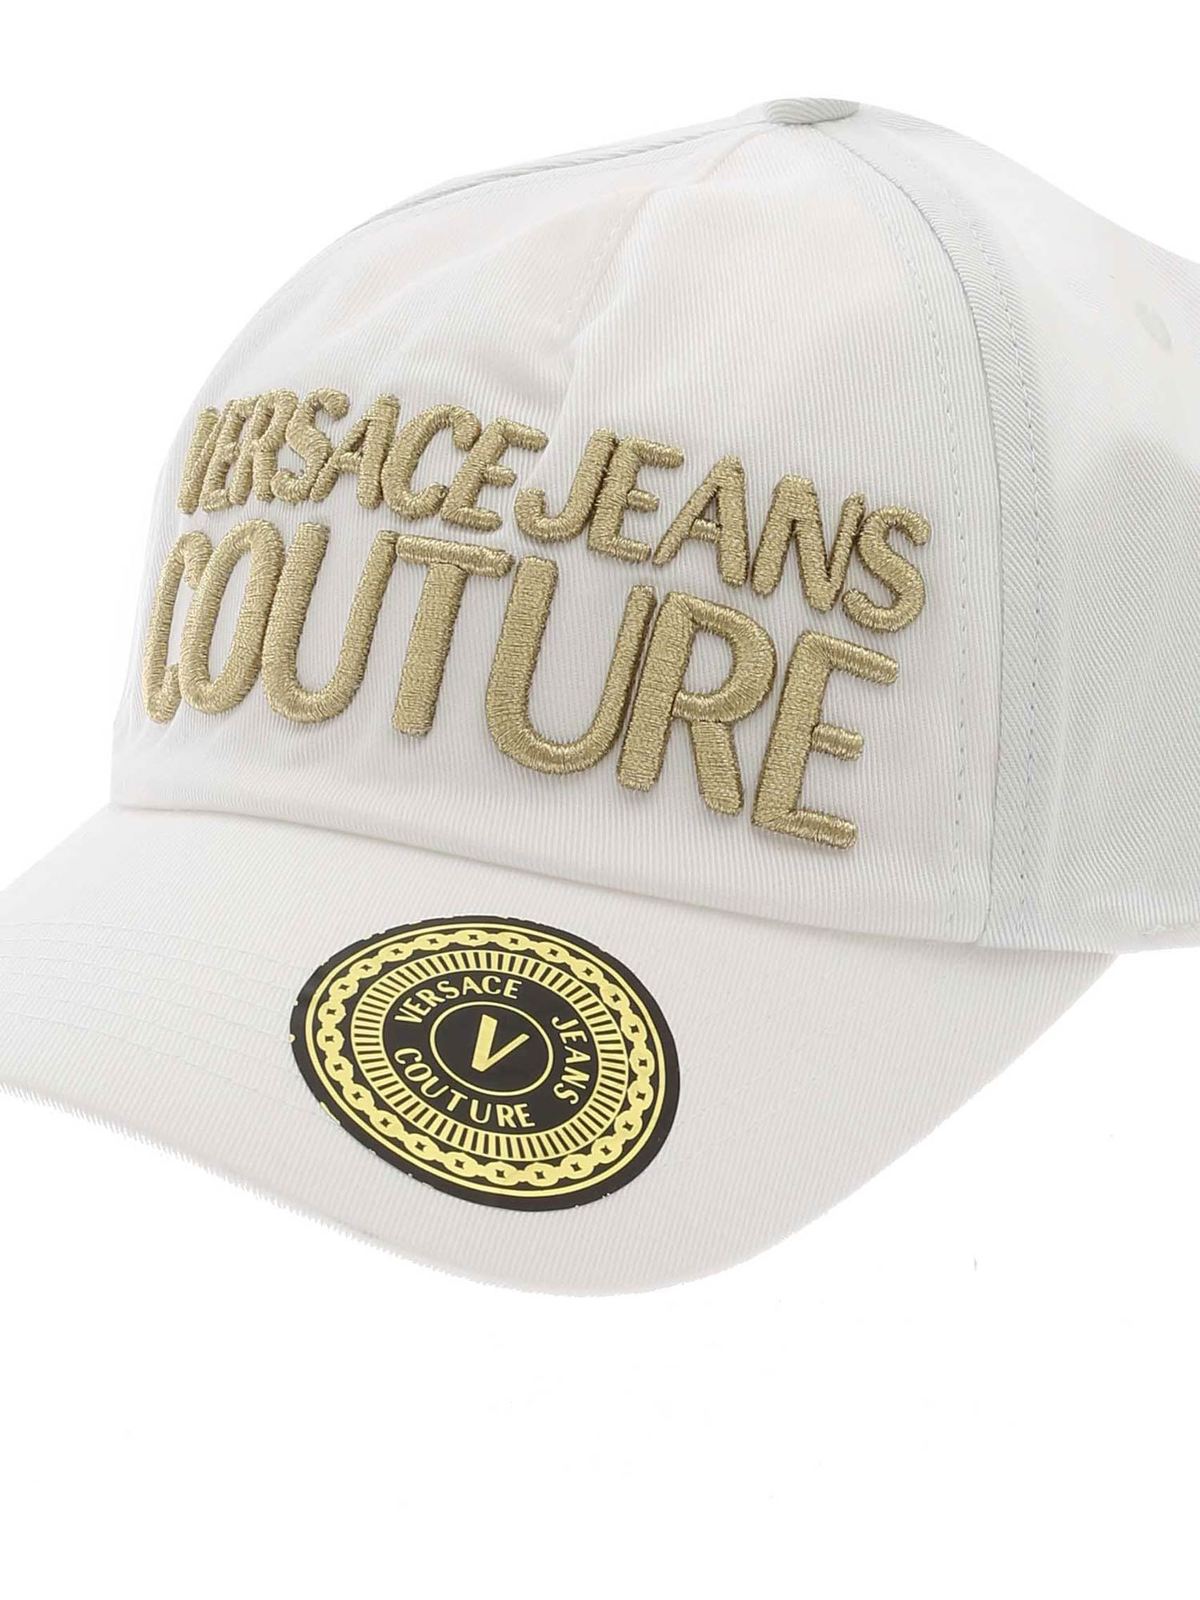 Versace Jeans Couture - Baseball cap in white - hats & caps ...